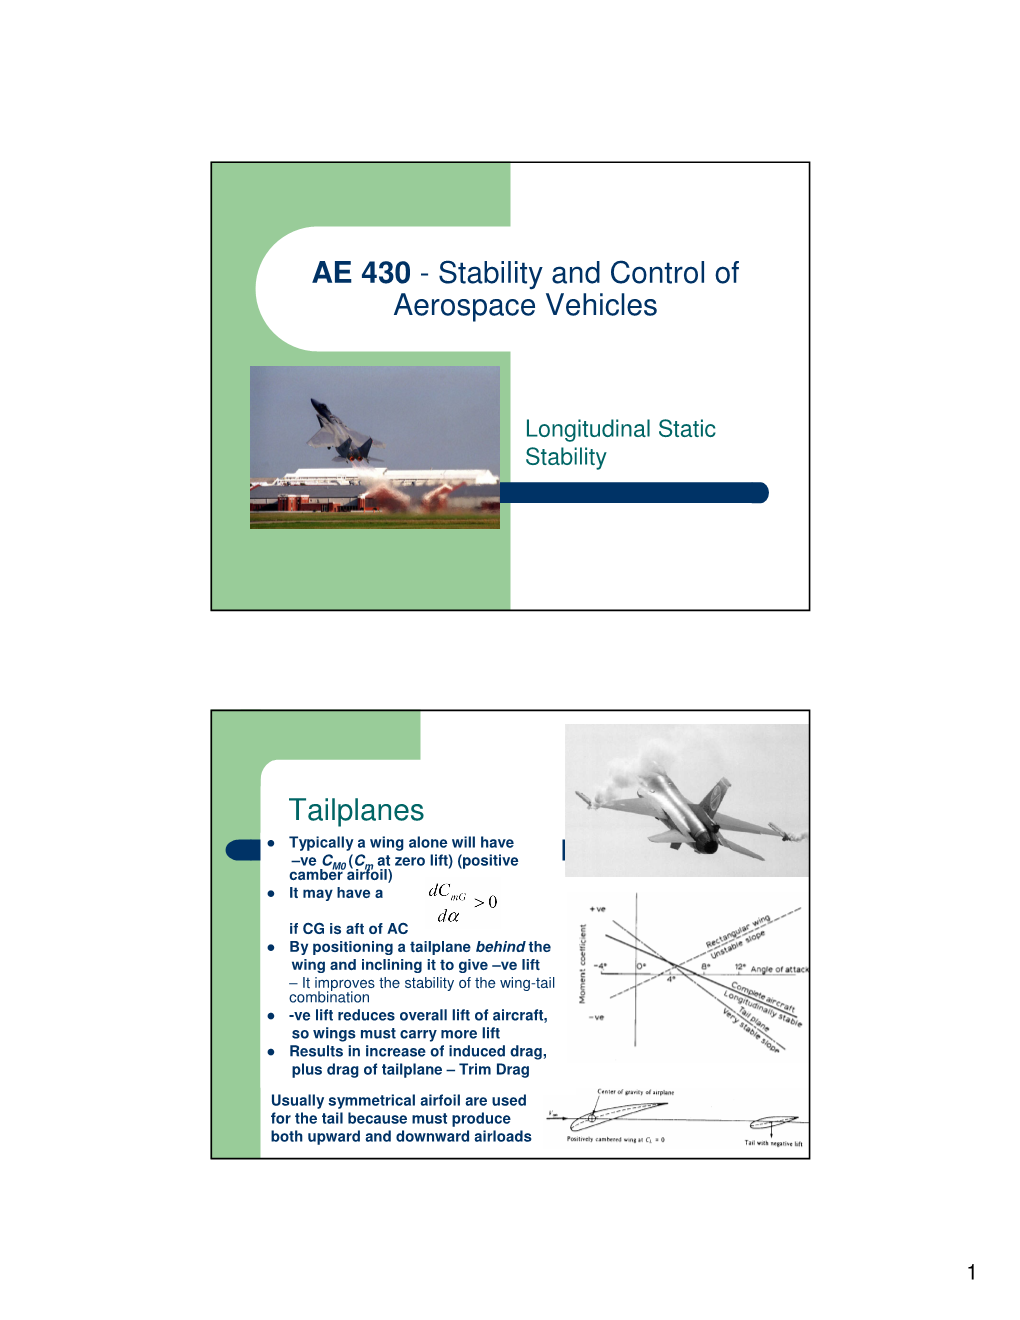 AE 430 - Stability and Control of Aerospace Vehicles